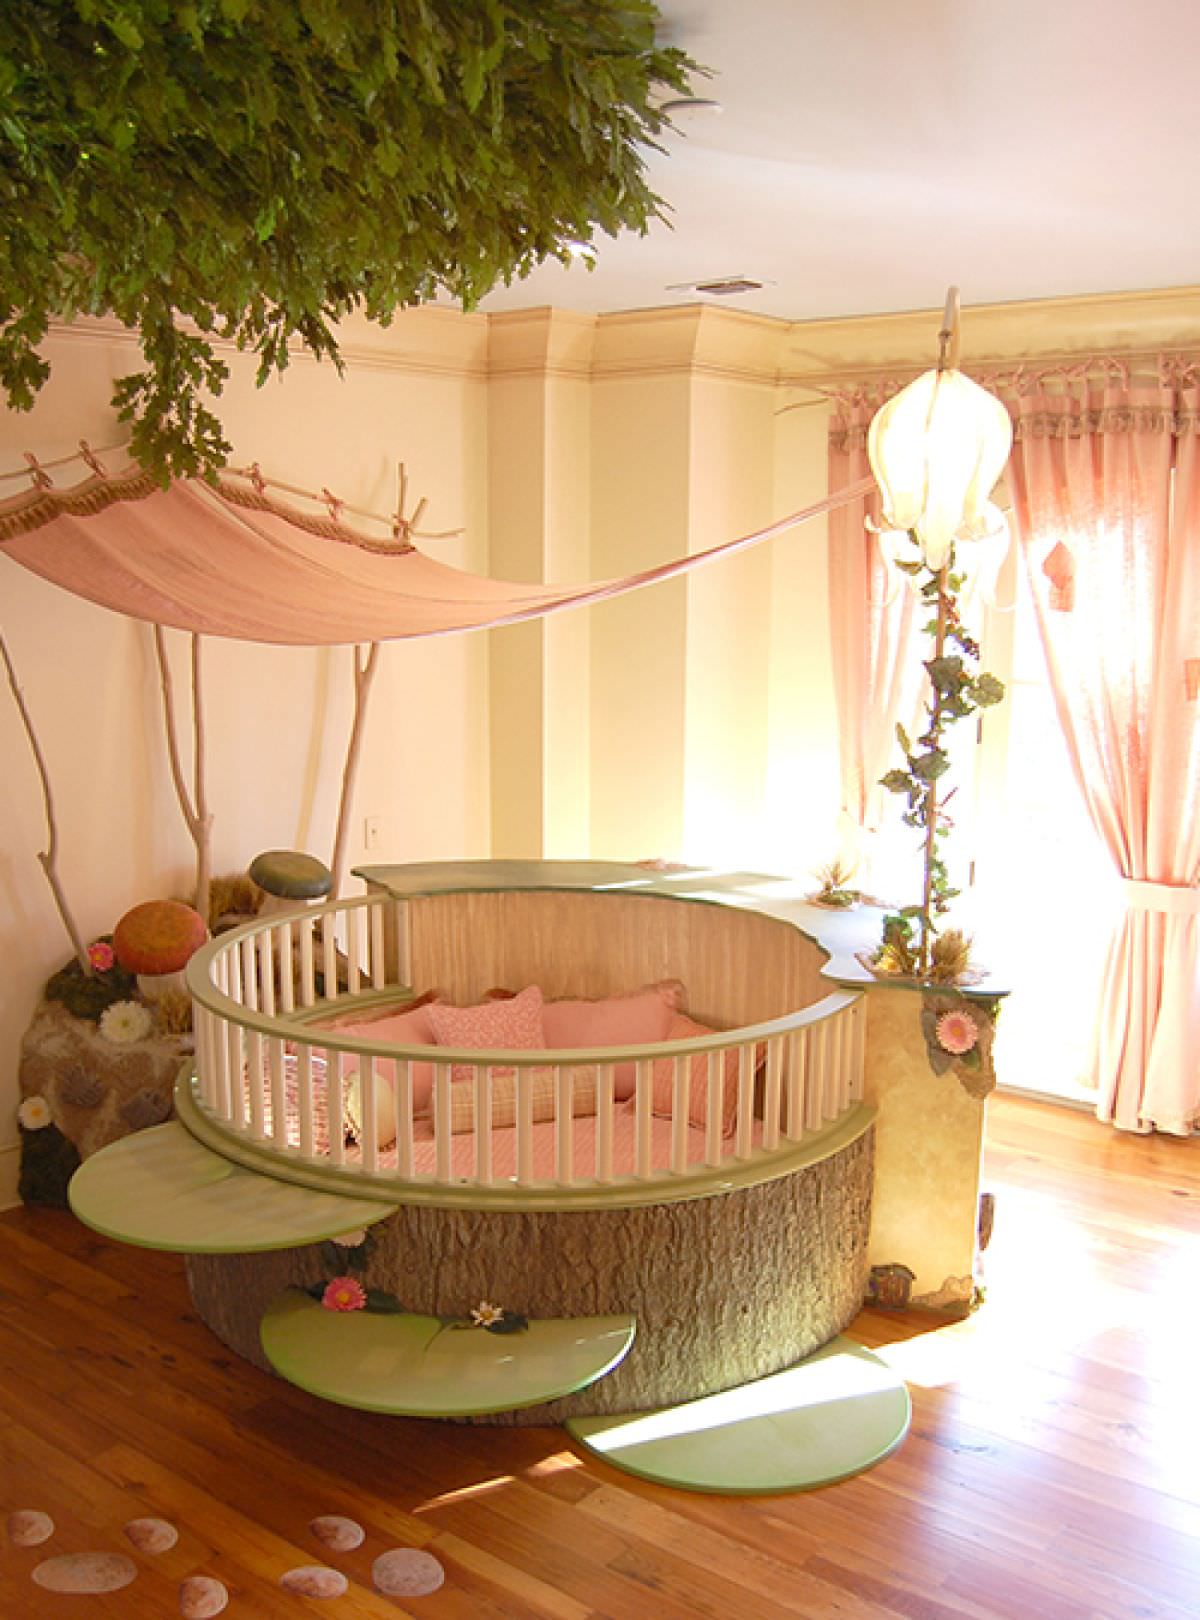 bedroom disney themed excellent rooms baby bed nursery fairy amazing toddler princess idea decor homes